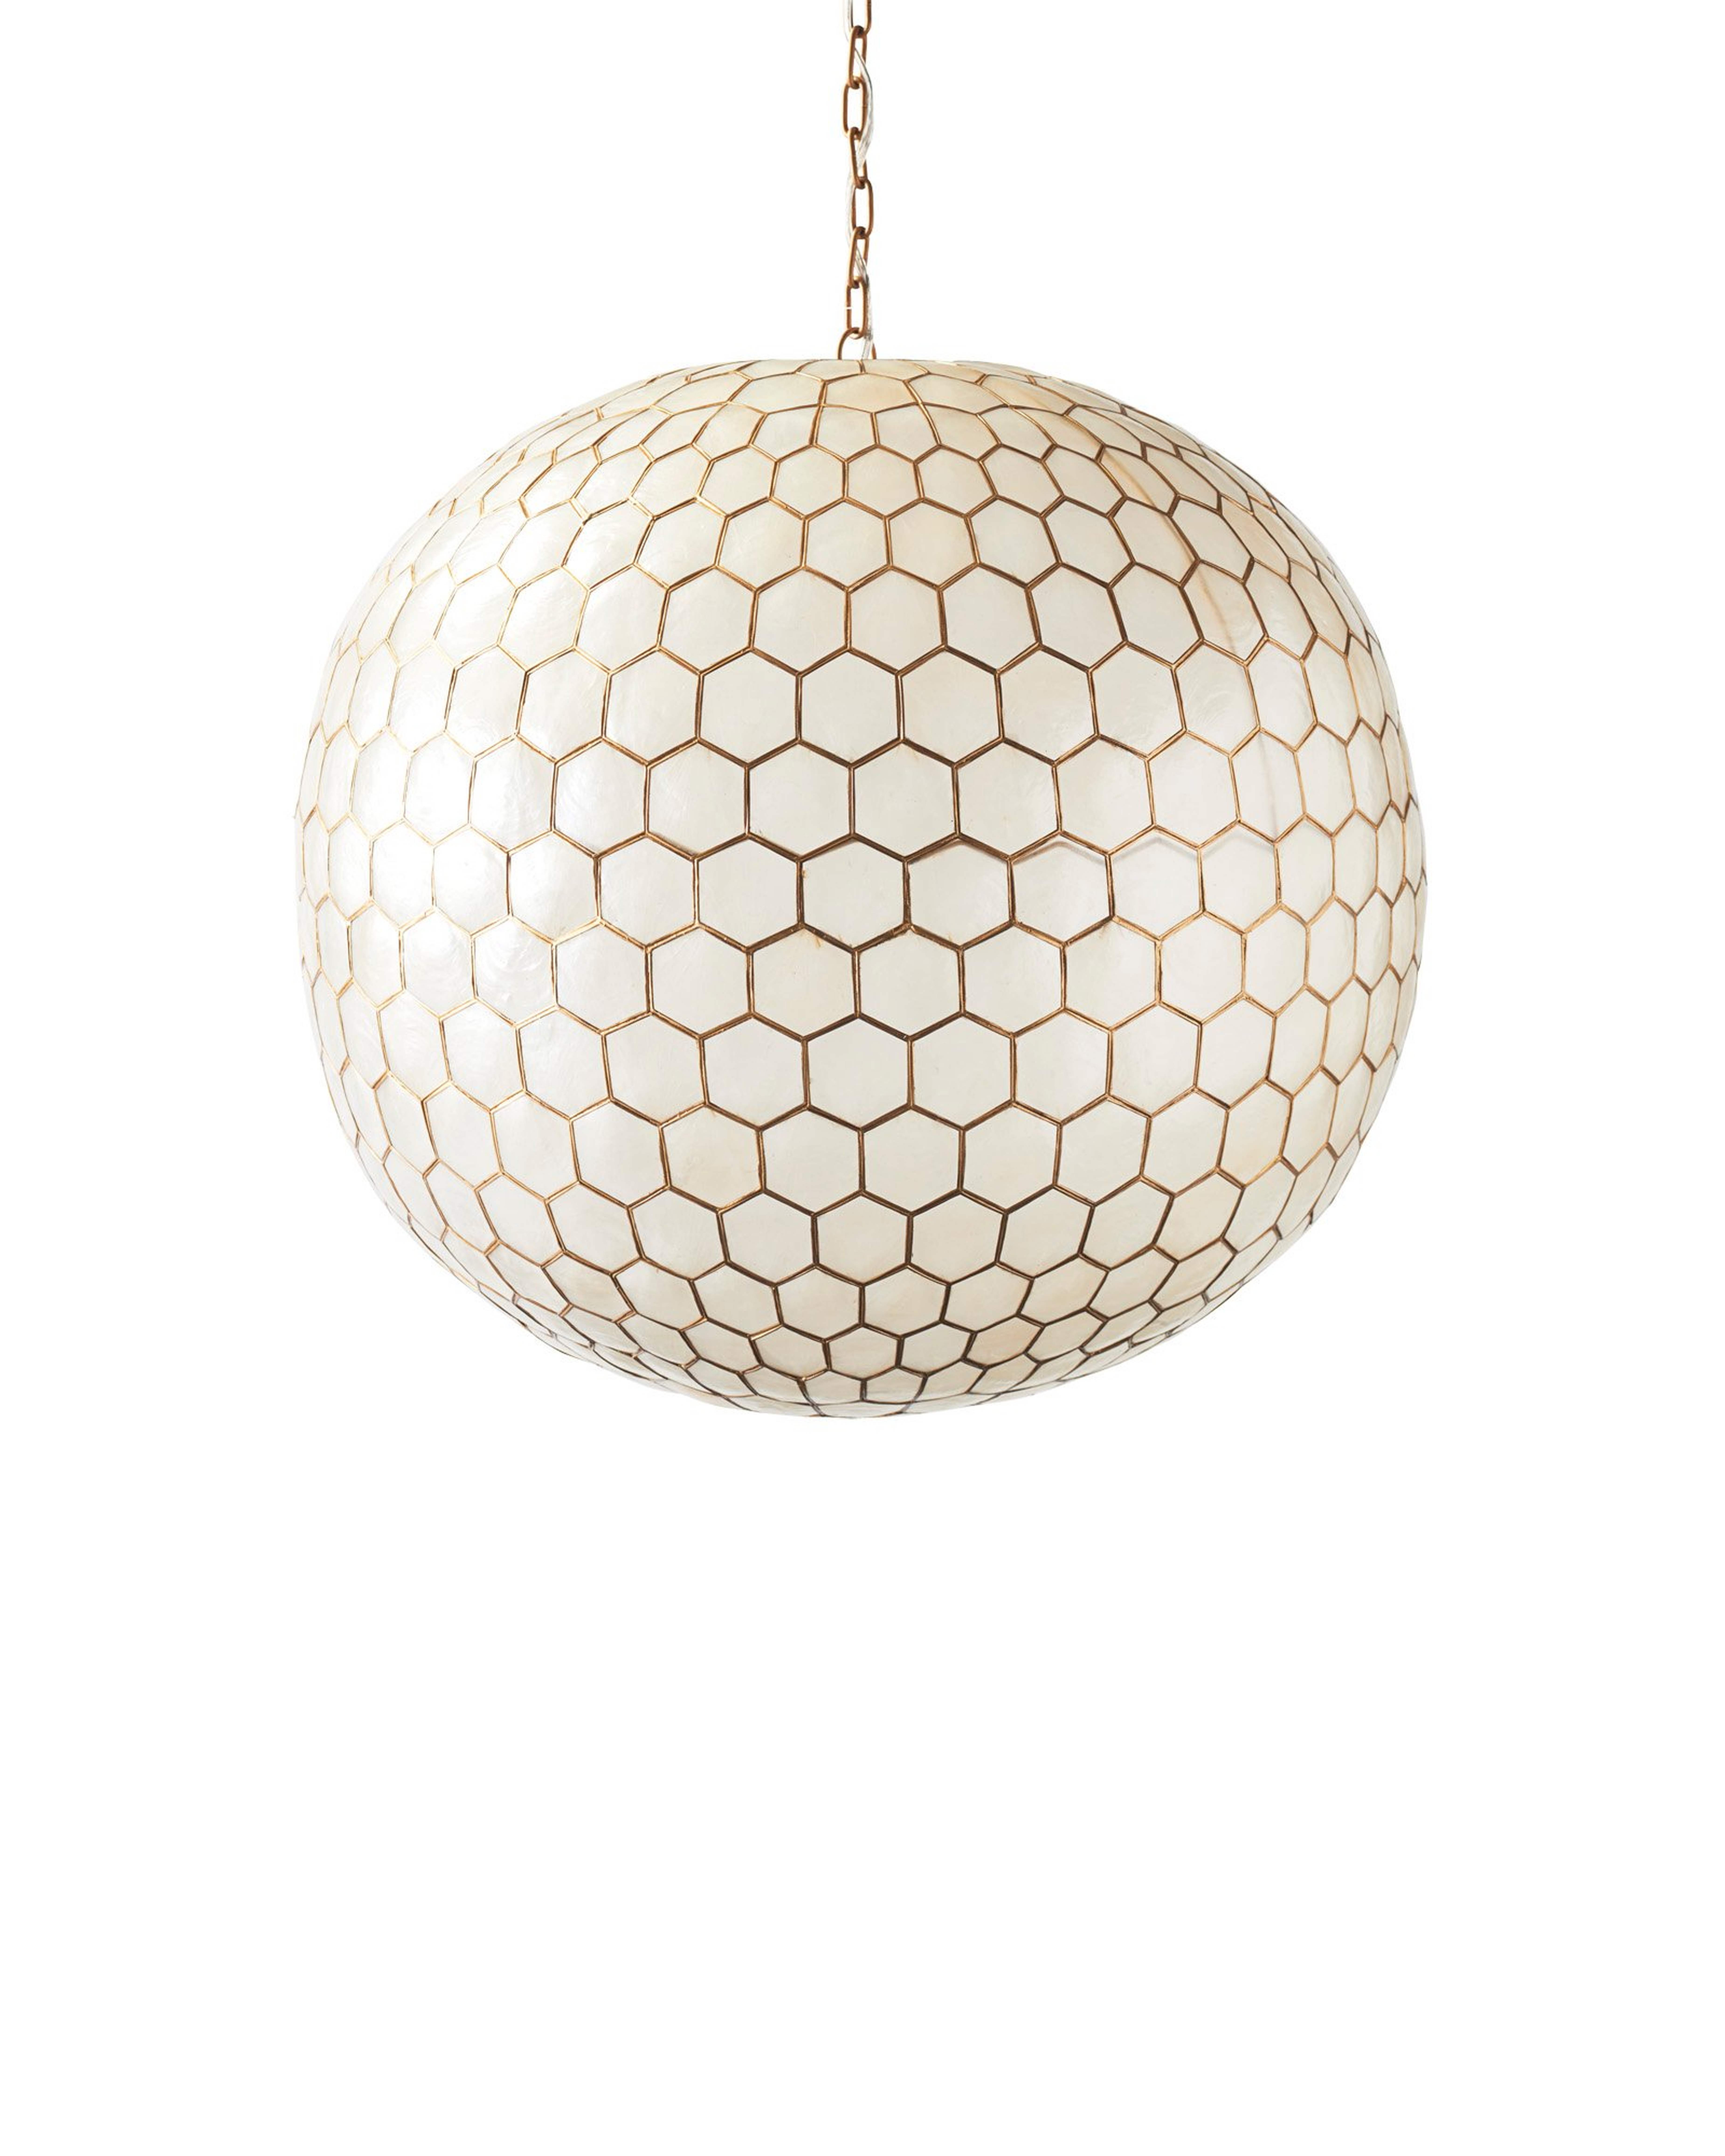 Capiz Honeycomb Chandelier - Small - Serena and Lily